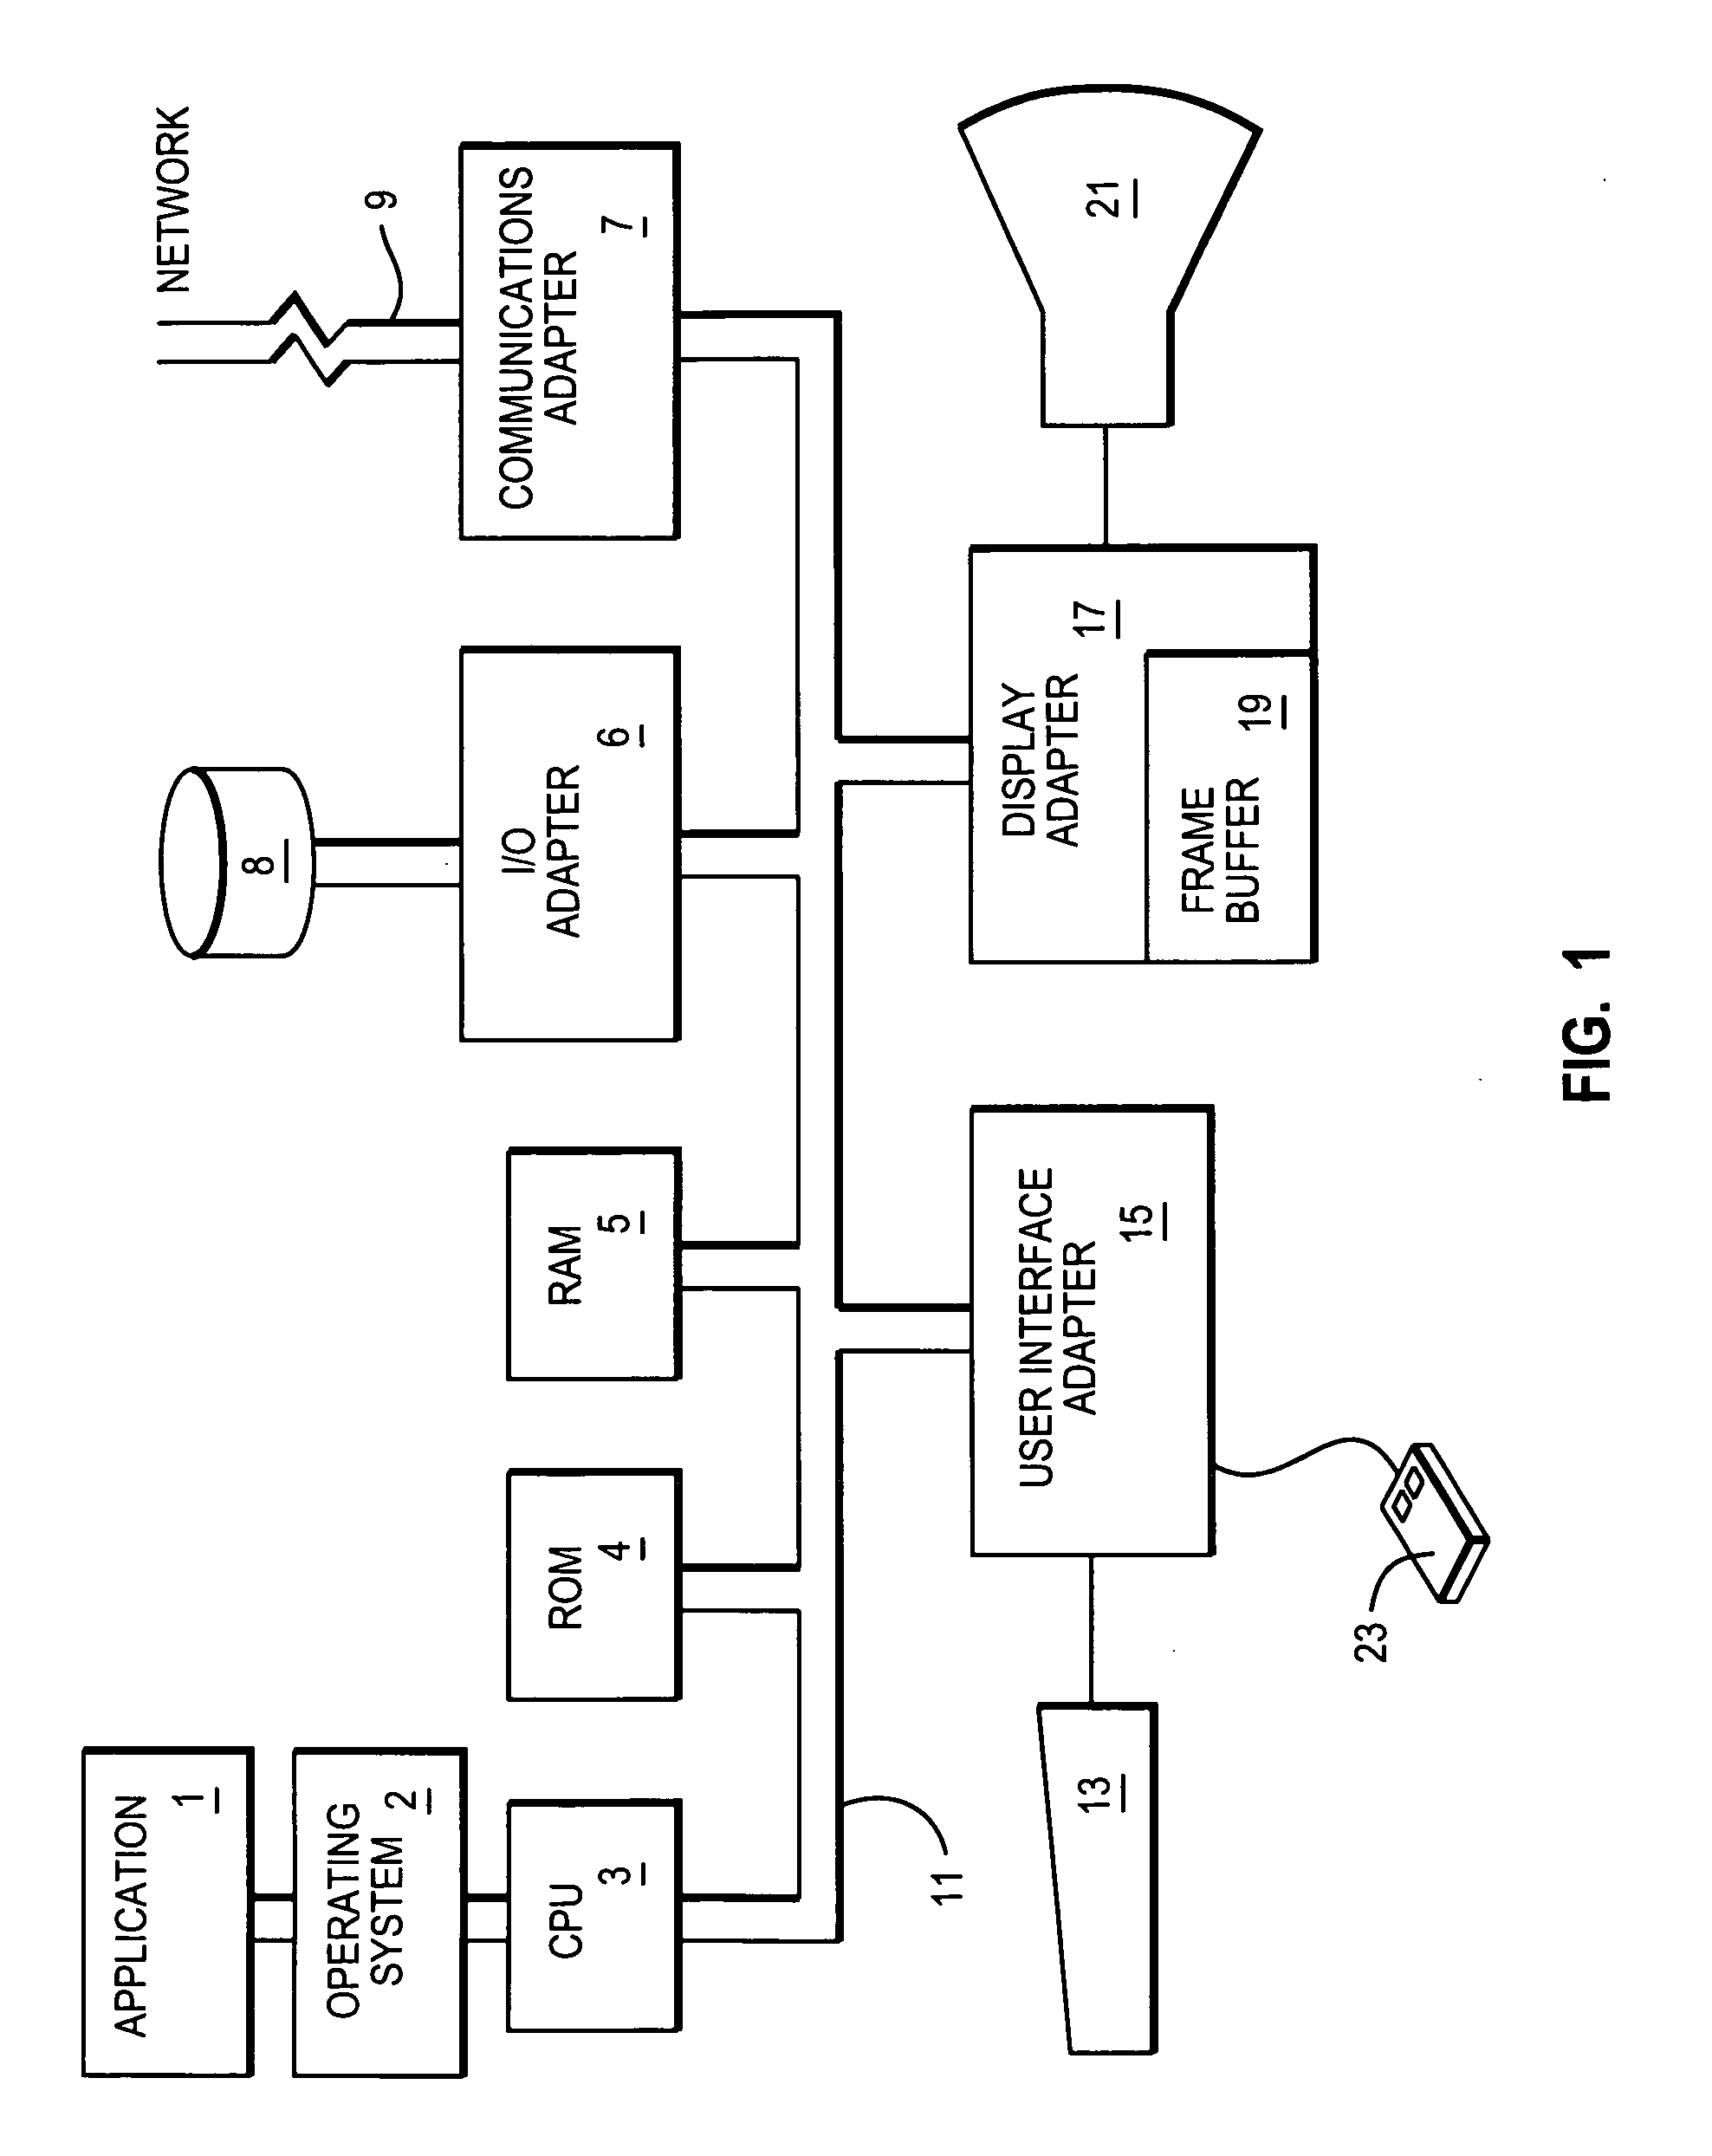 System and method for instant messaging